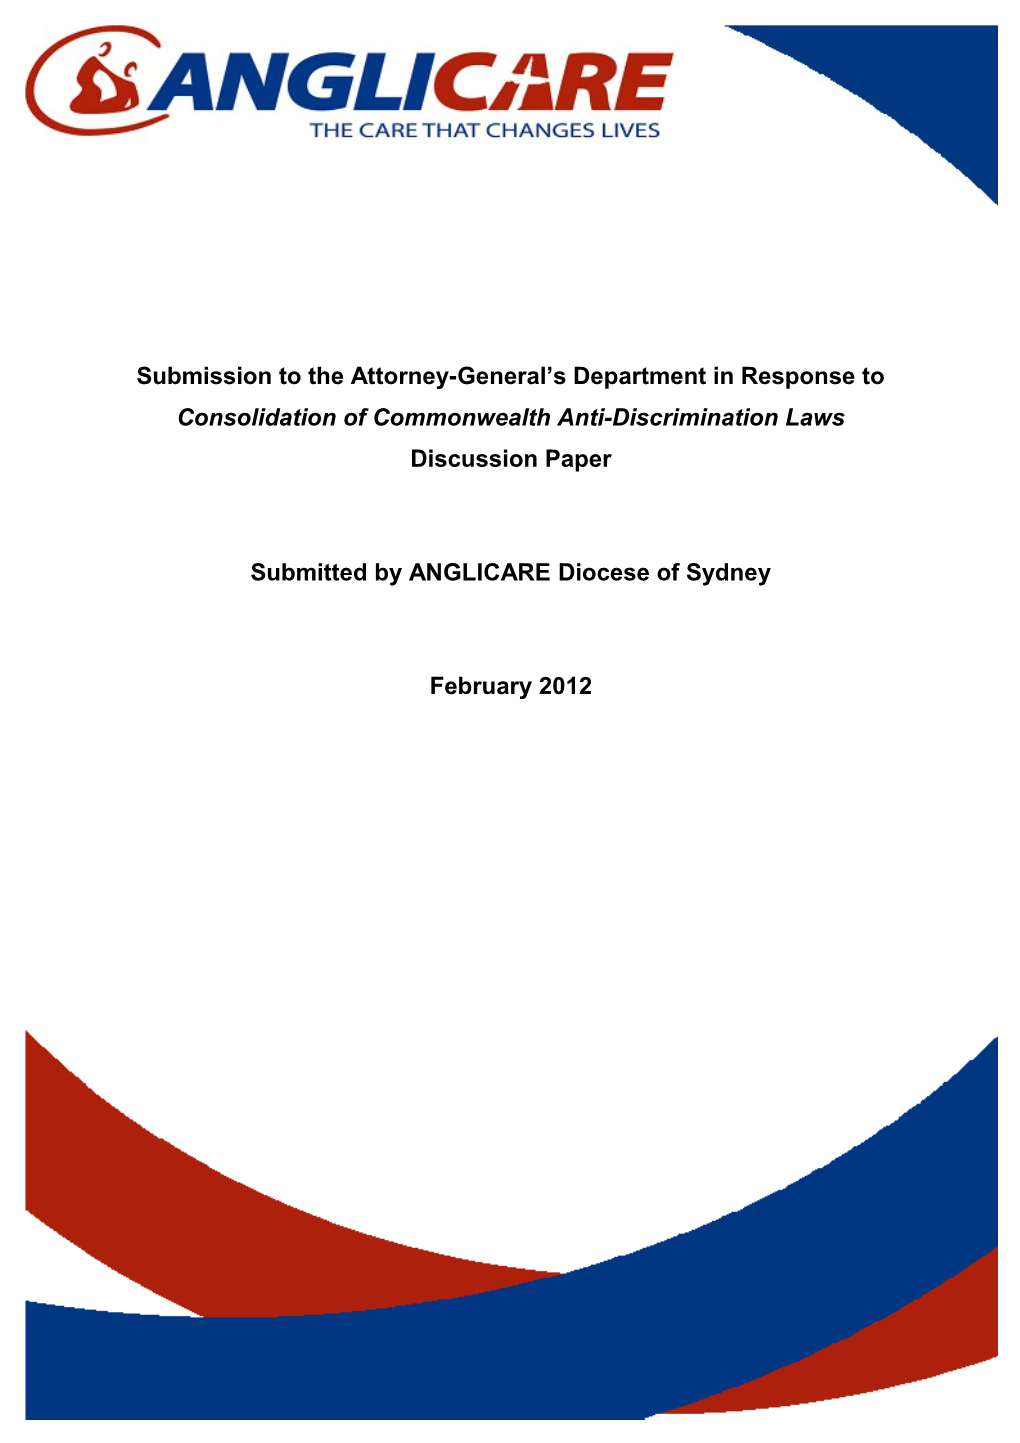 Submission on the Consolidation of Commonwealth Anti-Discrimination Laws - Anglicare Sydney